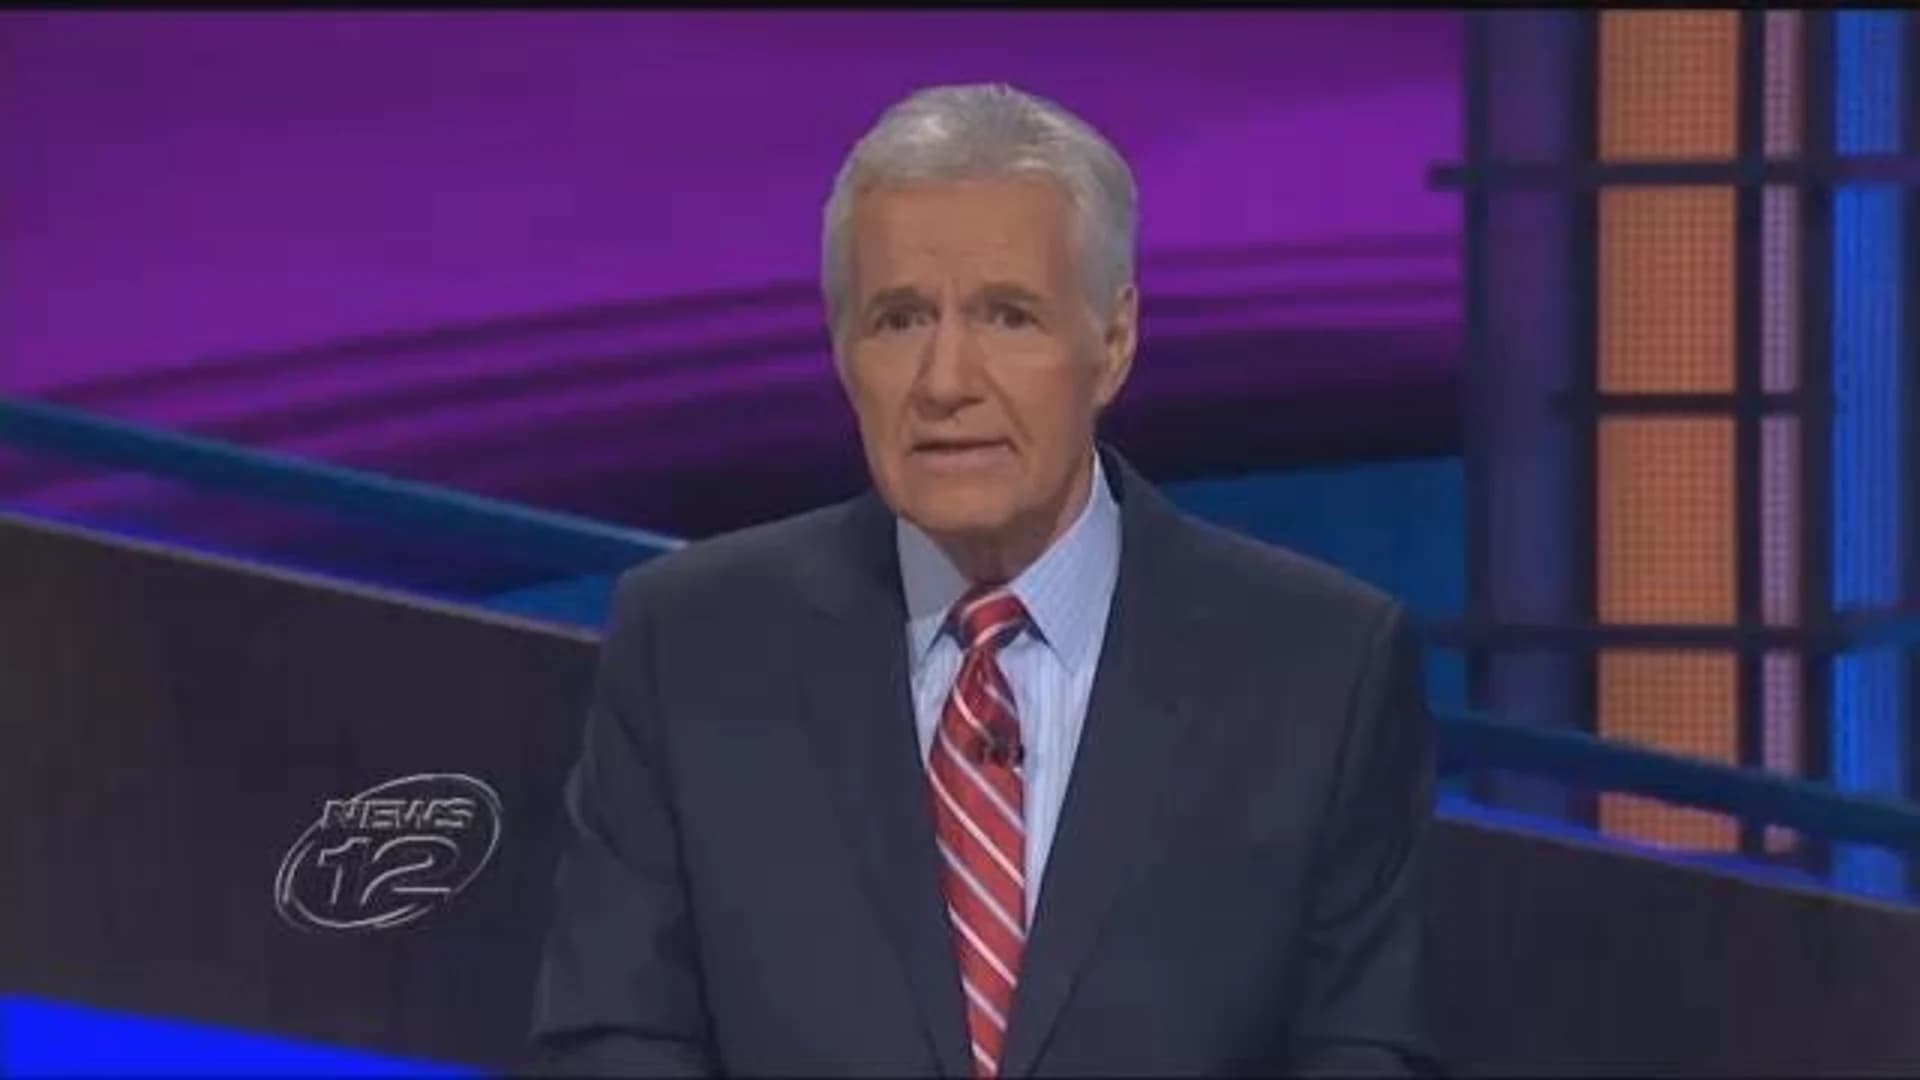 Doctor discusses pancreatic cancer in light of Alex Trebek’s cancer announcement